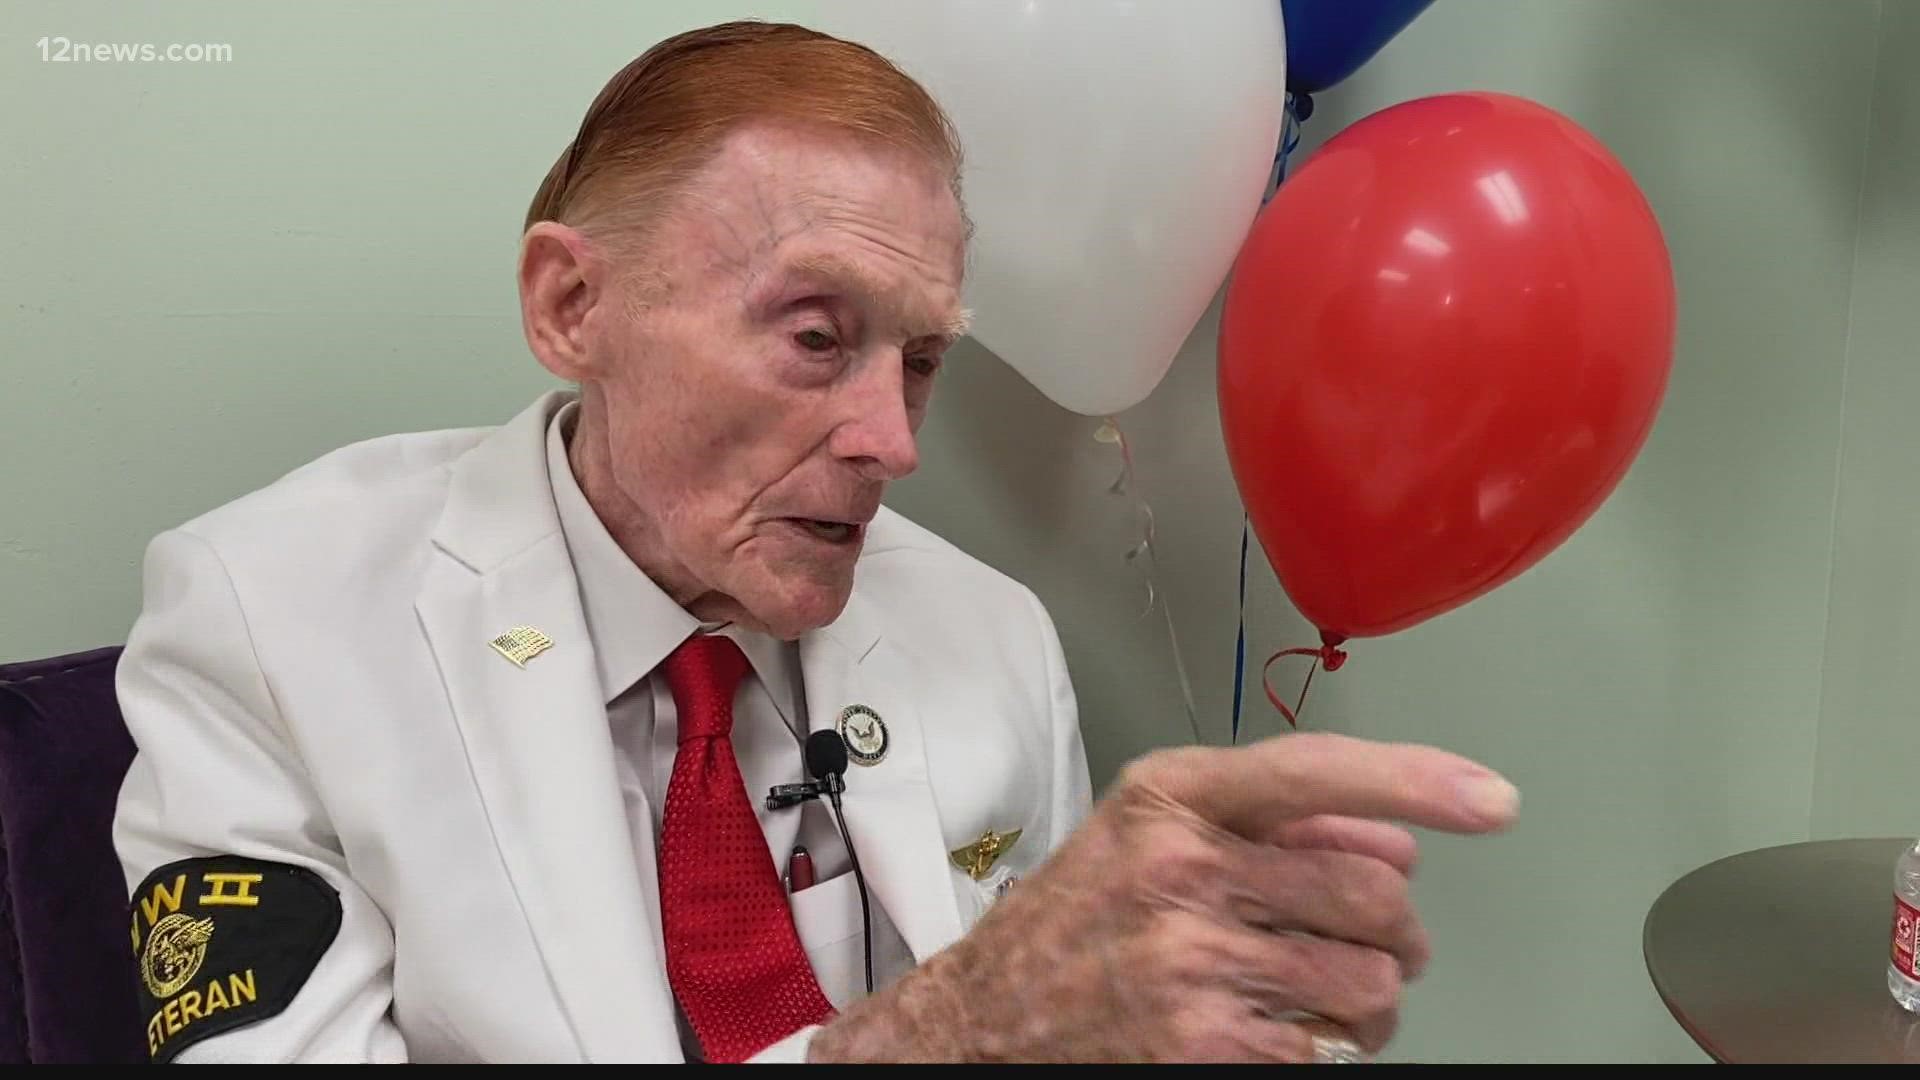 The survivor, named Jack Holder, turns 100 years old next month. He went on to serve in more than 300 missions with the Navy after Pearl Harbor.